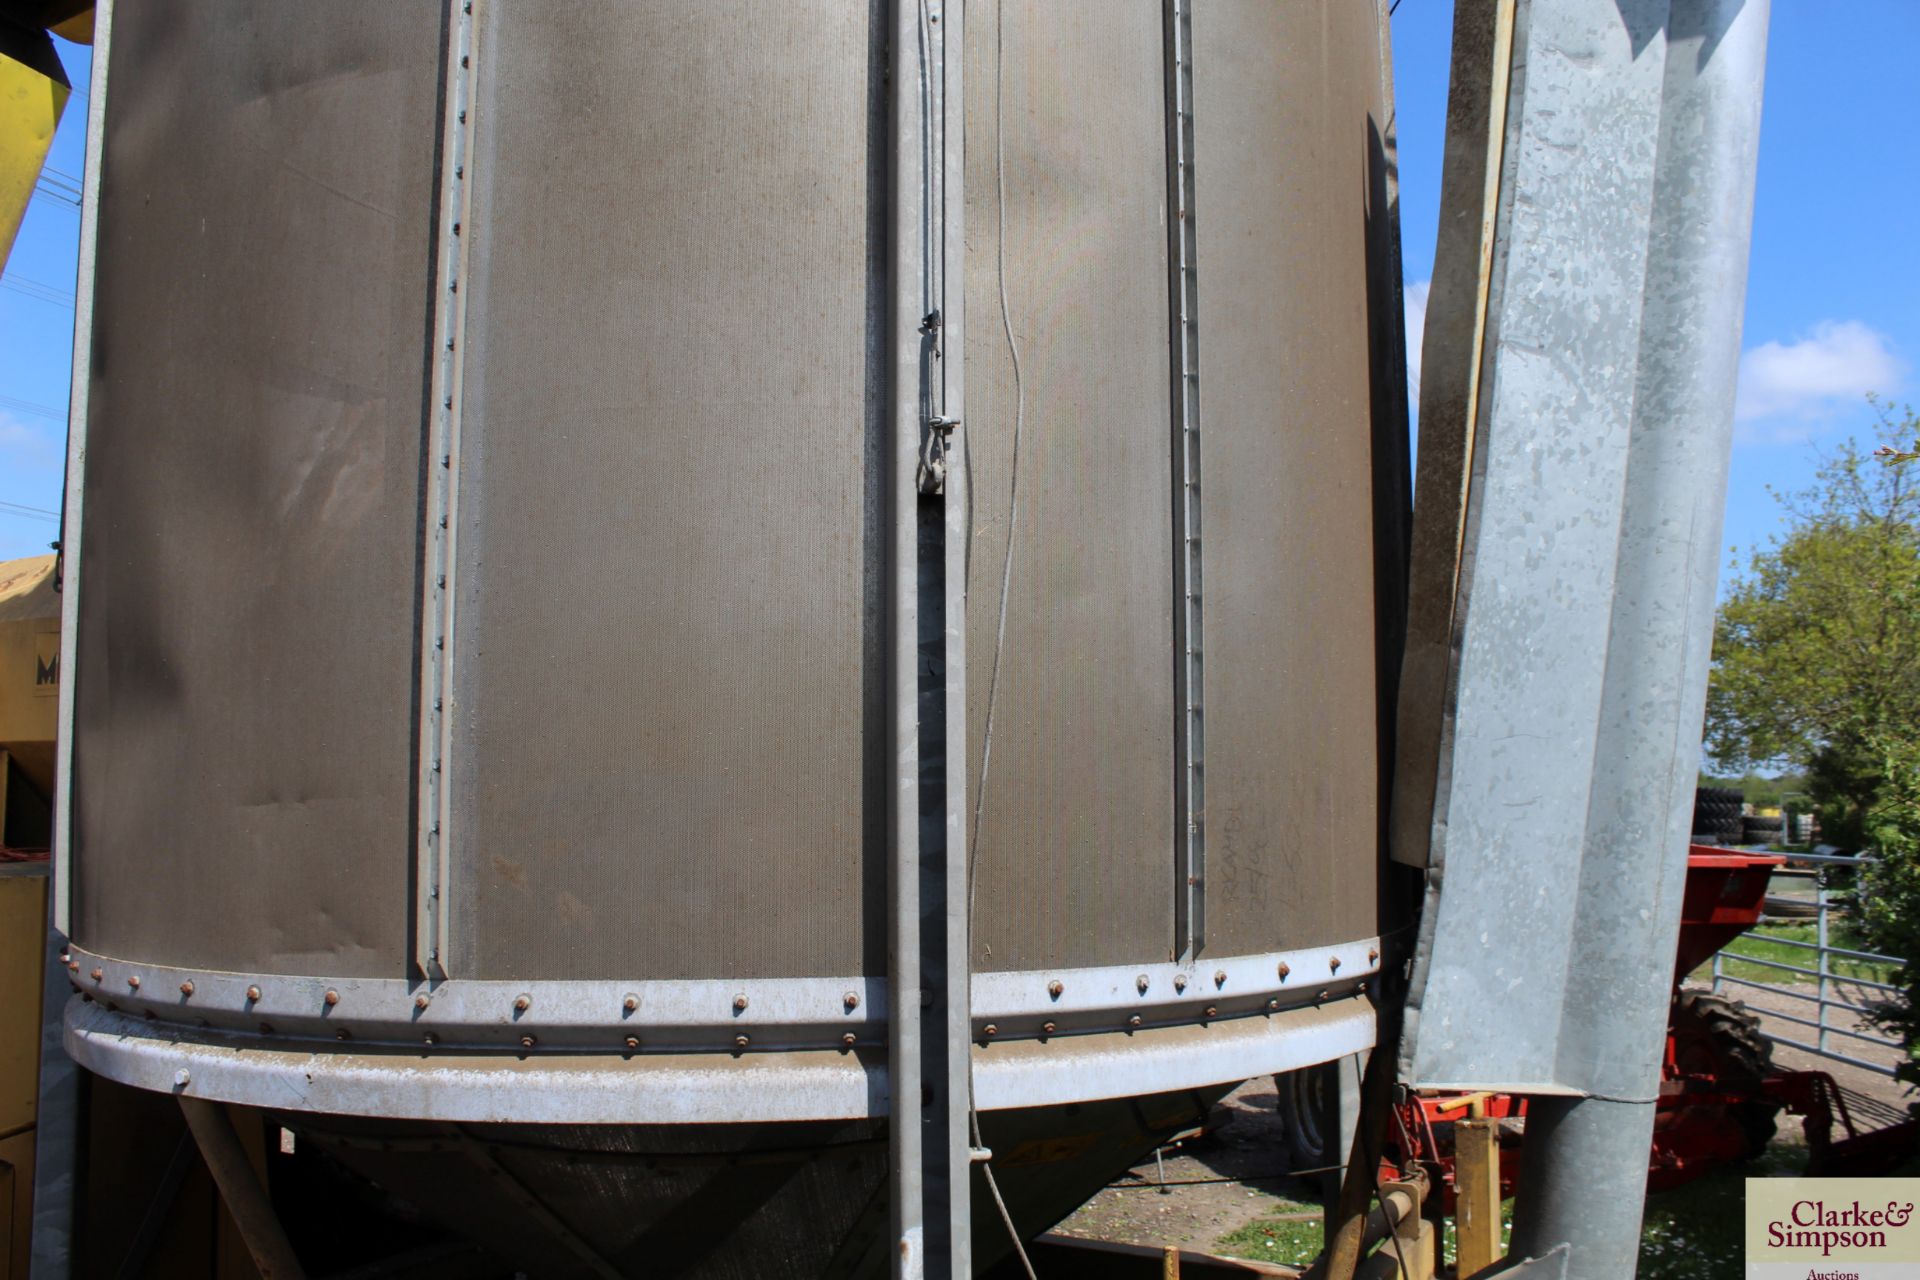 Mecmar 13T mobile grain drier. 326 hours. For sale due to retirement. V - Image 9 of 21